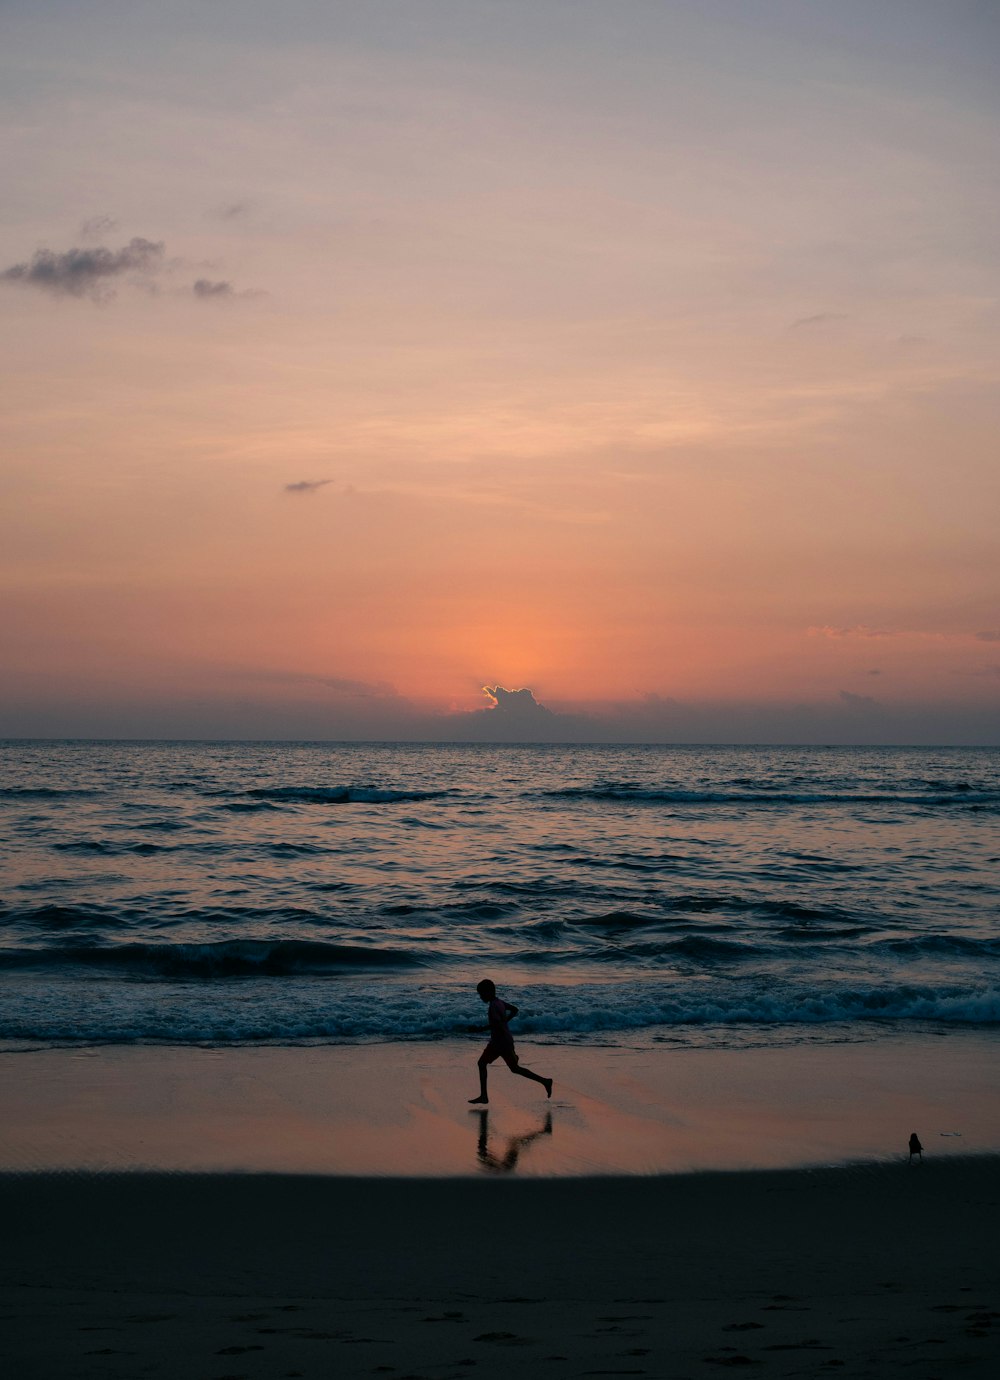 a person running on the beach at sunset